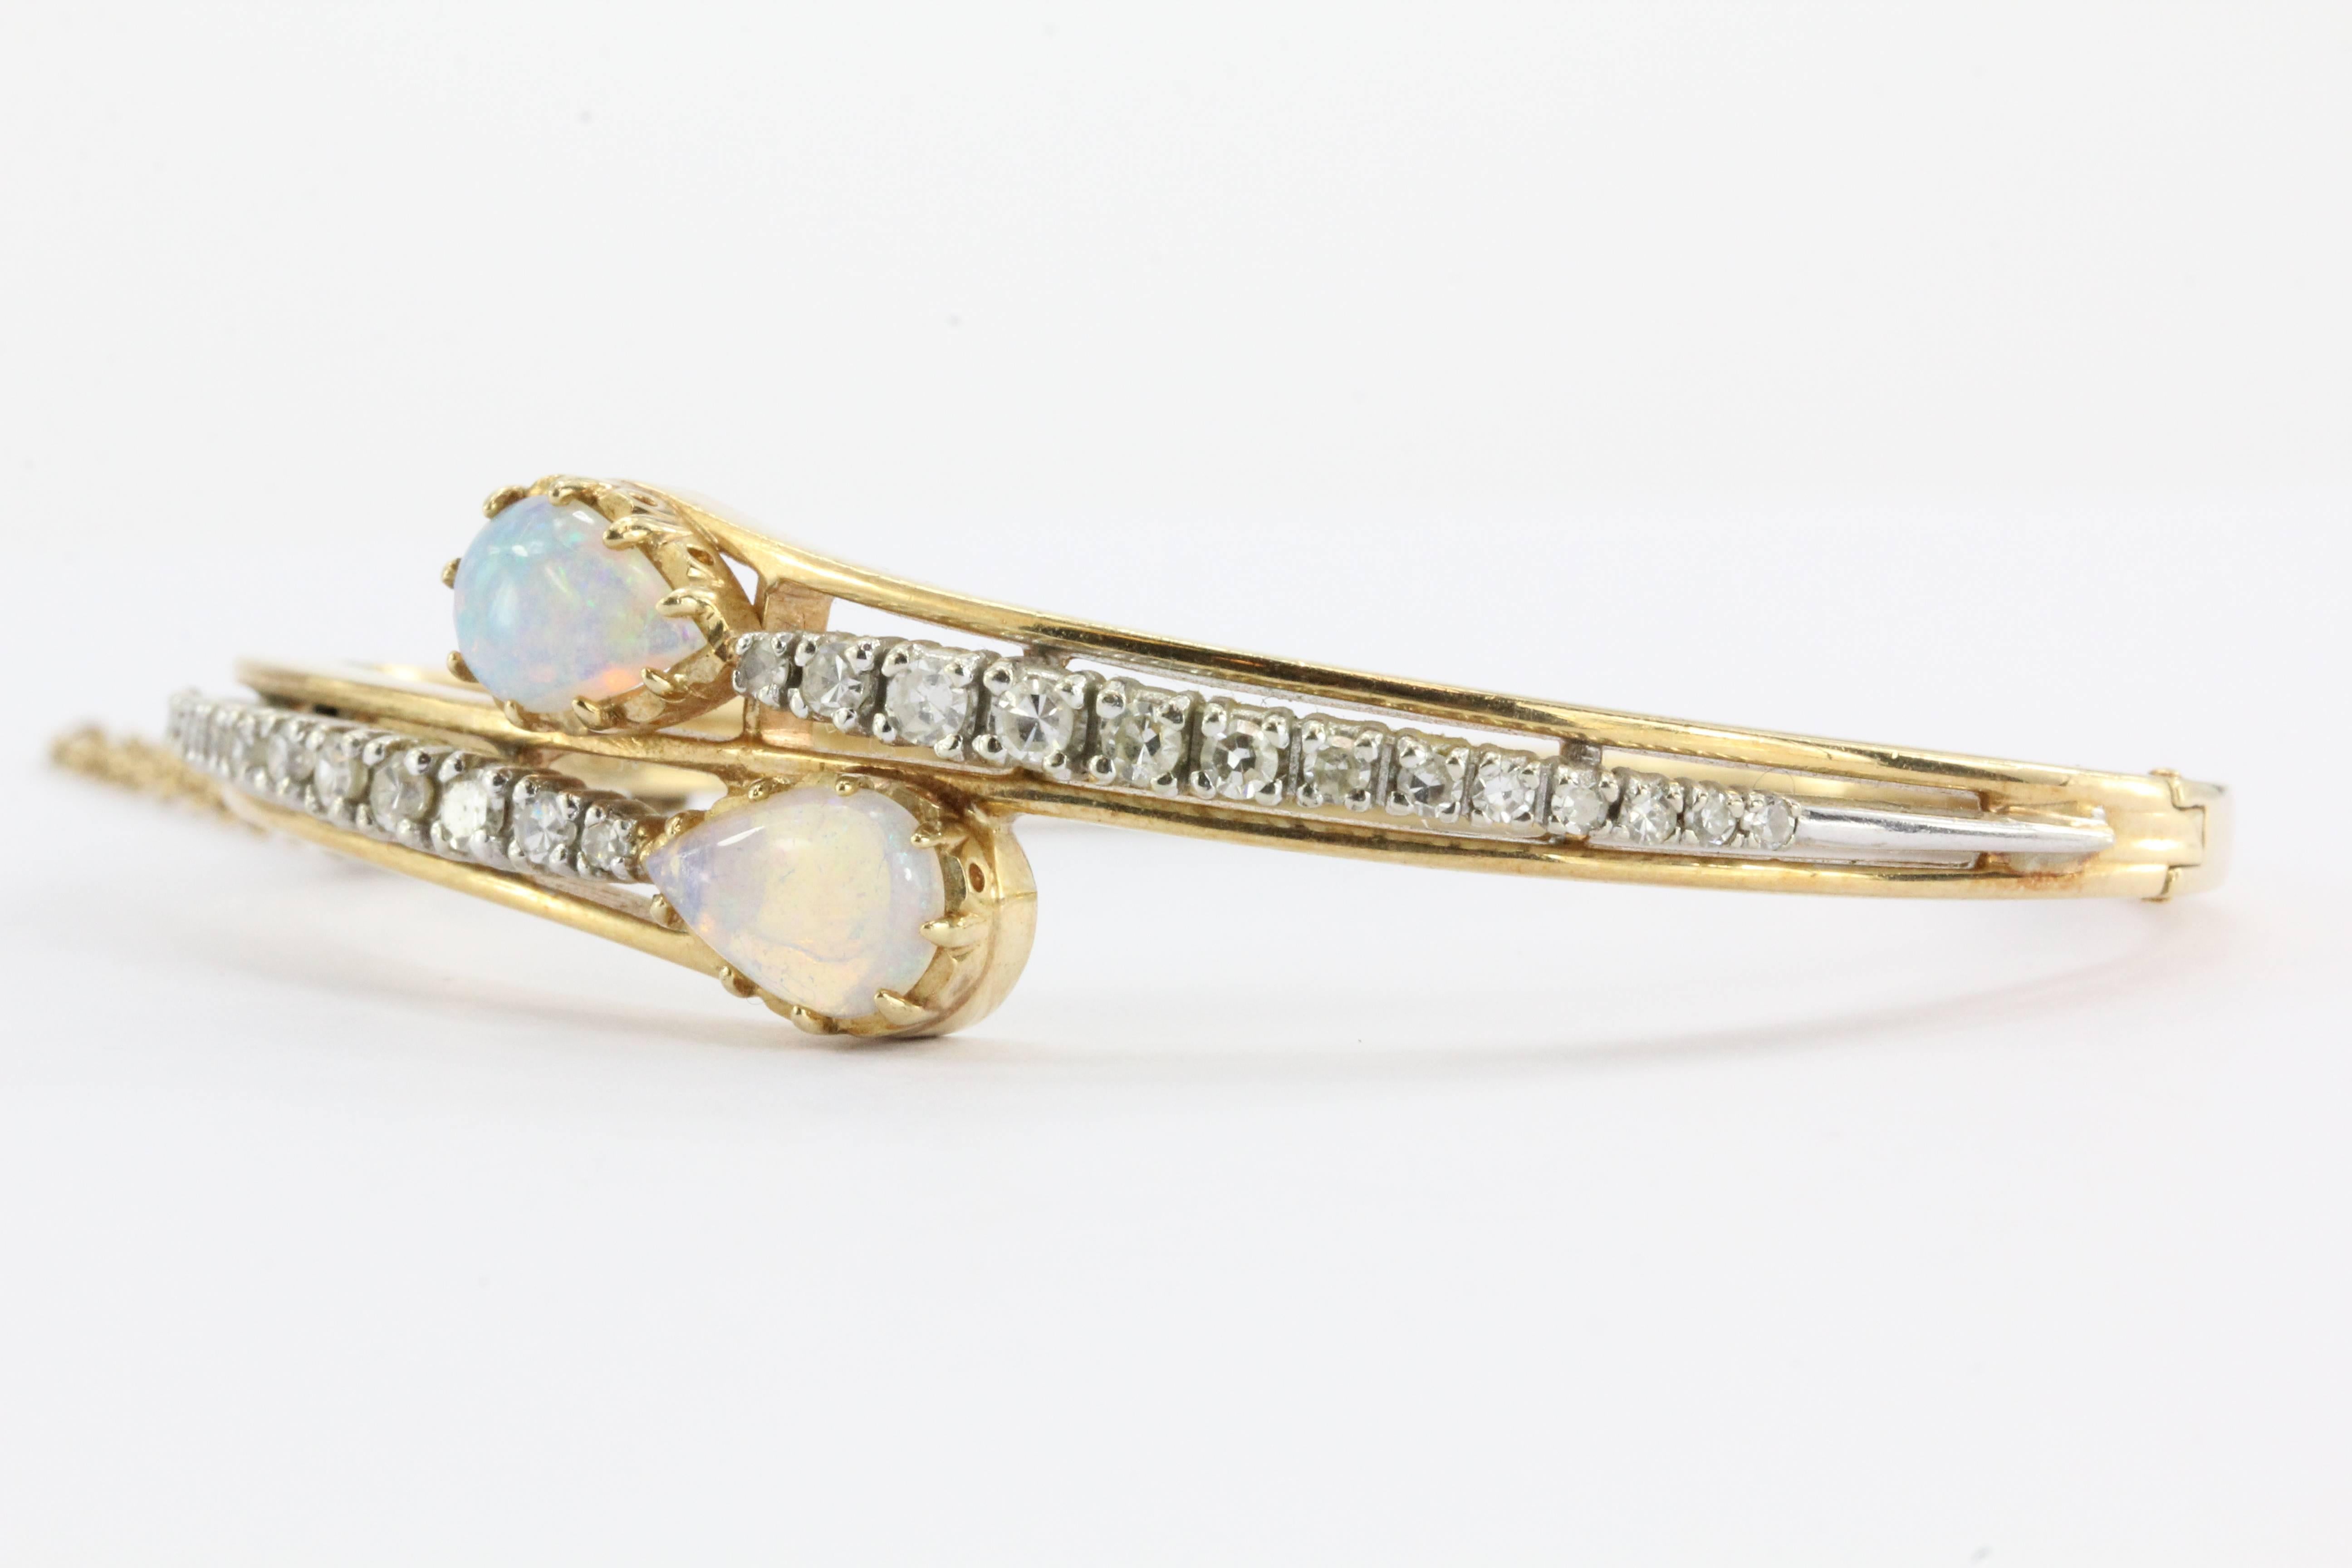 Casbah 14K Gold Diamond & Translucent Opal Bangle Bracelet. The bracelet is in excellent estate condition and ready to wear. It is signed 14K Casbah. The piece is mostly 14K yellow gold with two thin applied parts of 14K white gold. It is set with